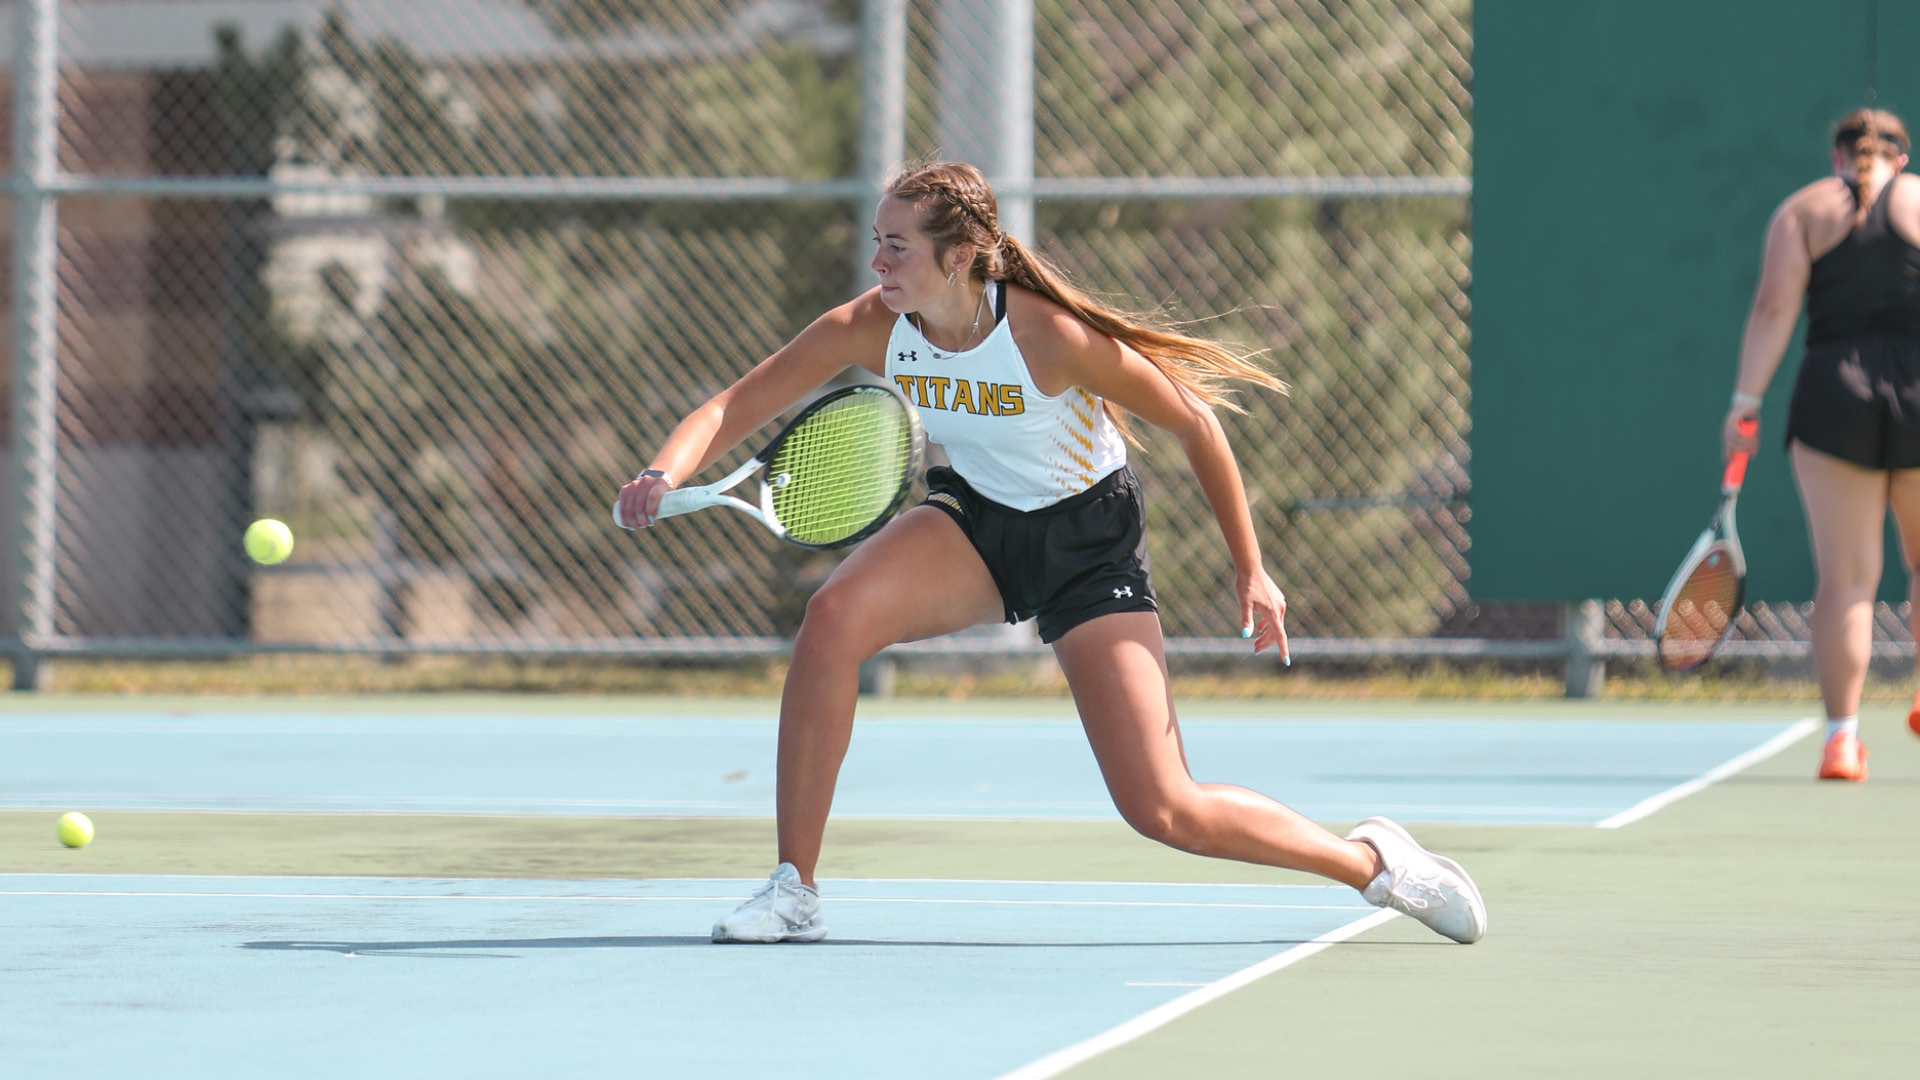 Alysa Pattee earned a doubles win of 8-3 with Olivia Pethan and a singles win of 6-0, 6-1 on Saturday